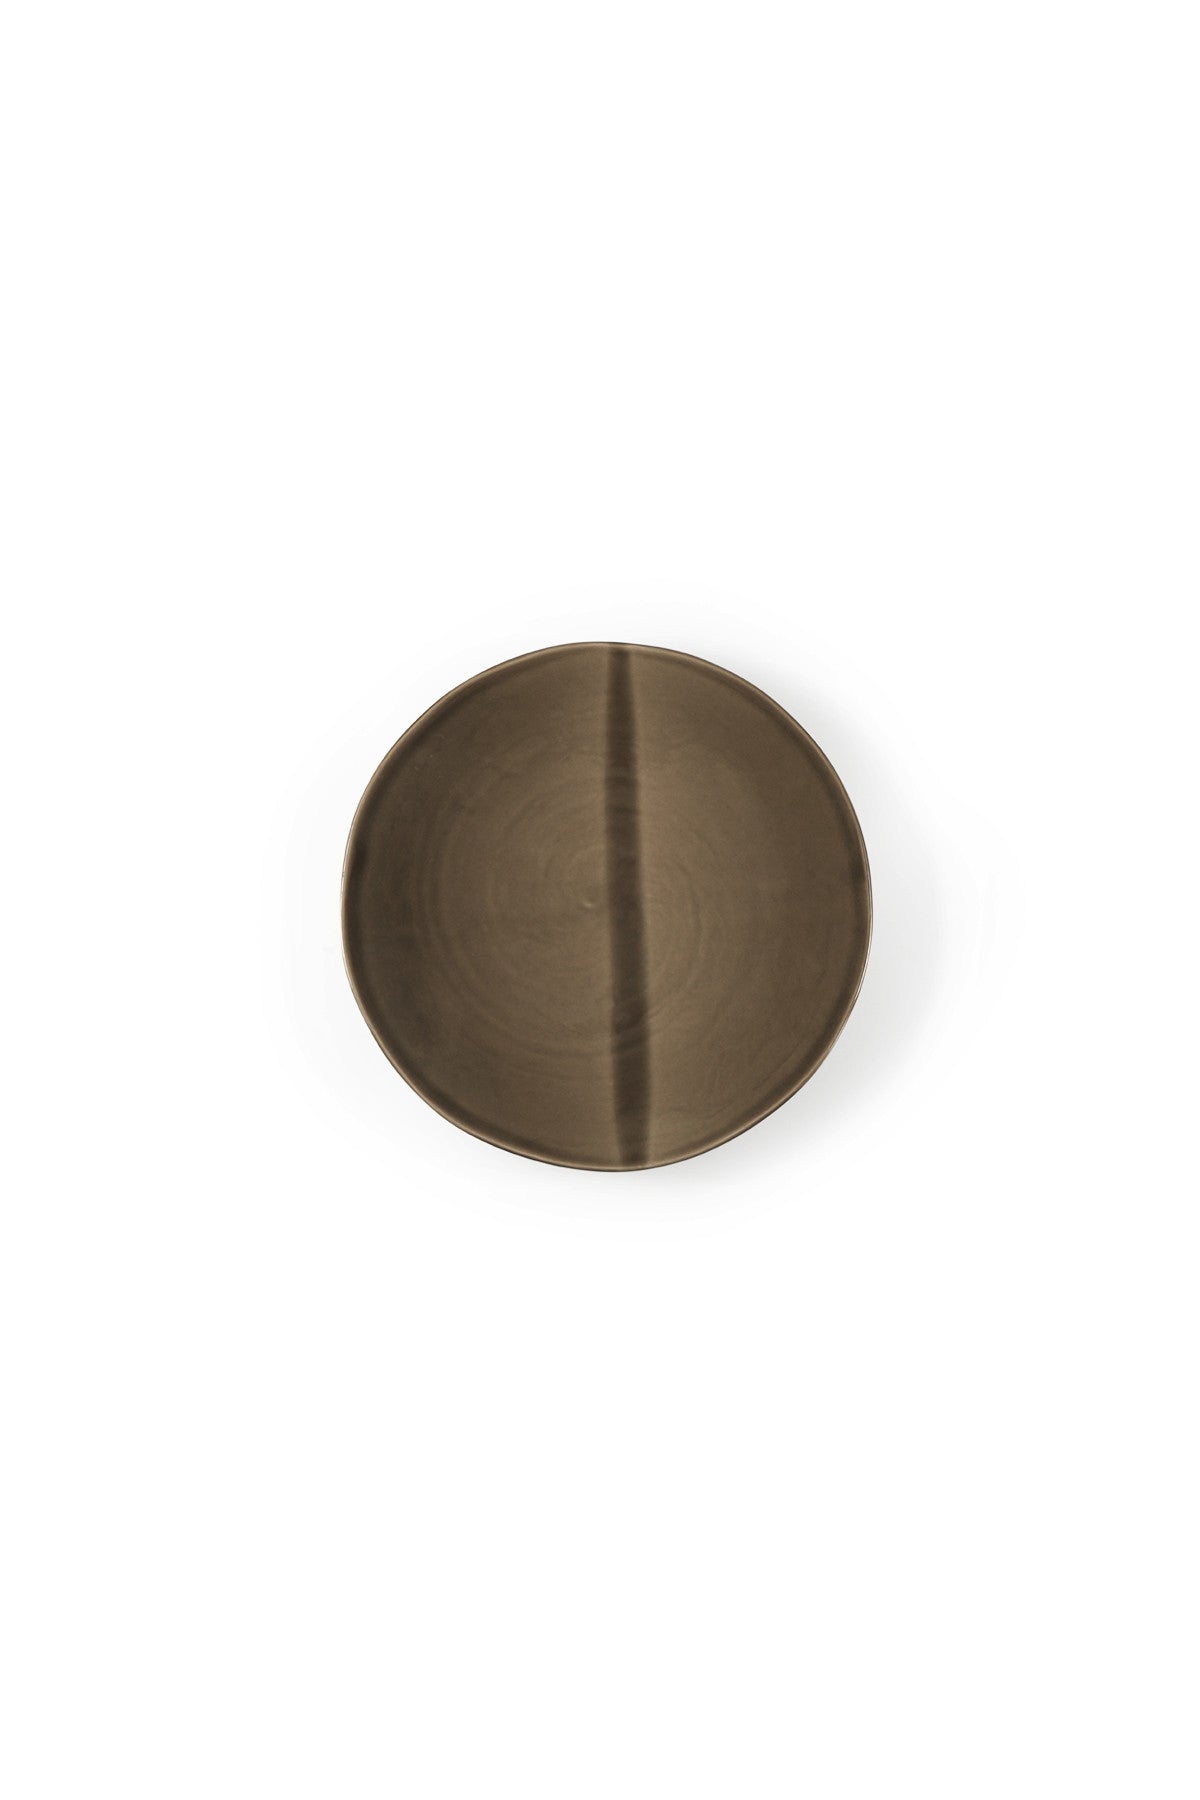 PLATE 23cm SMOOTH, OLIVE